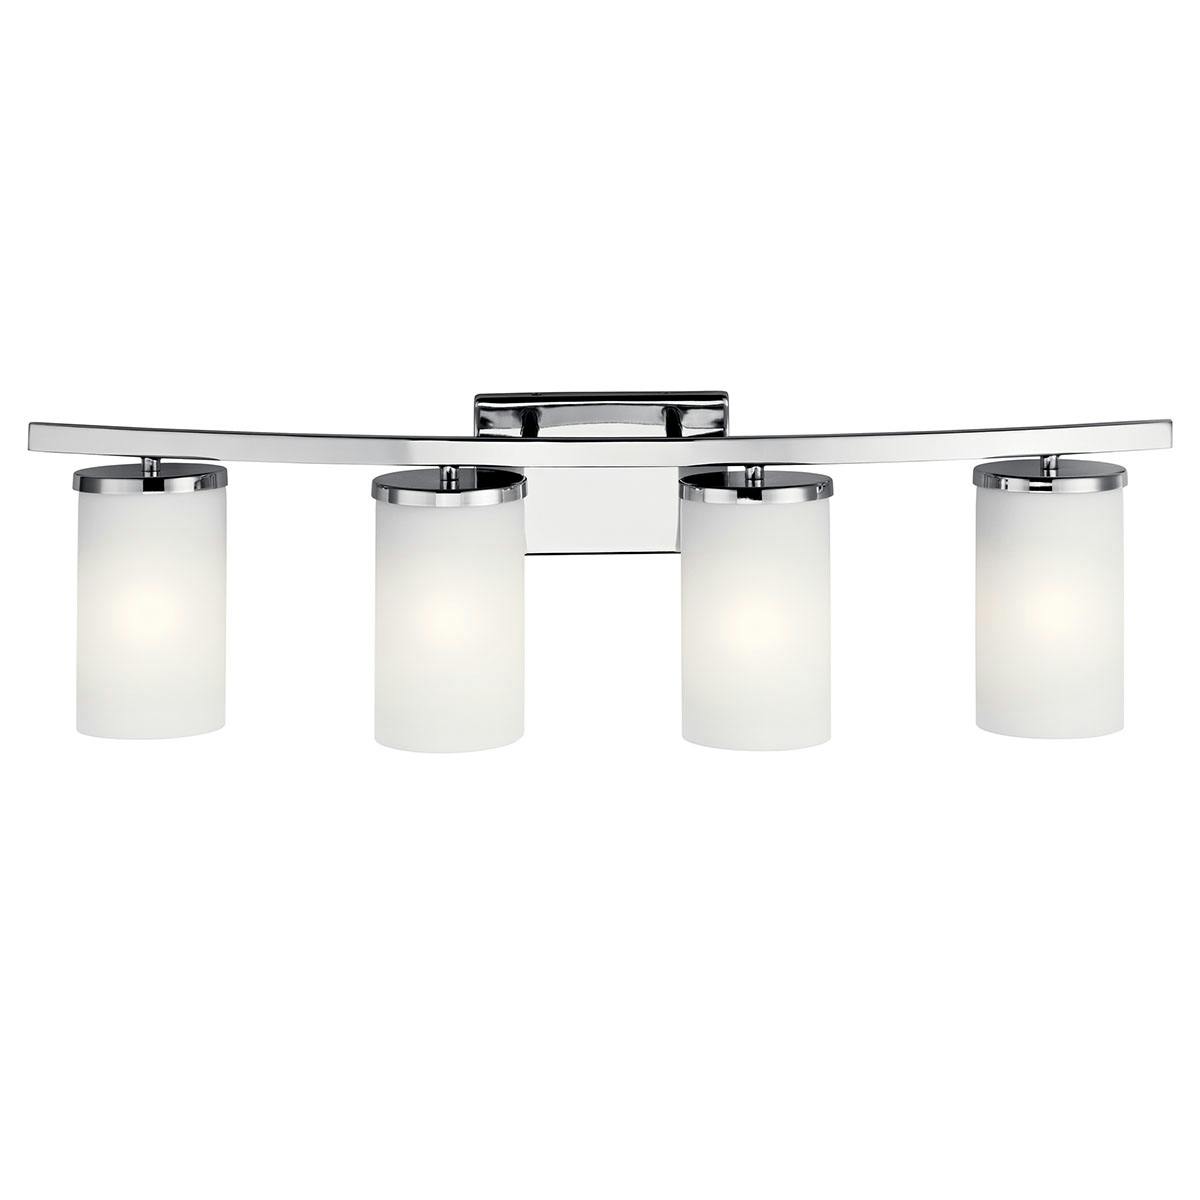 The Crosby 31" Vanity Light in Chrome facing down on a white background